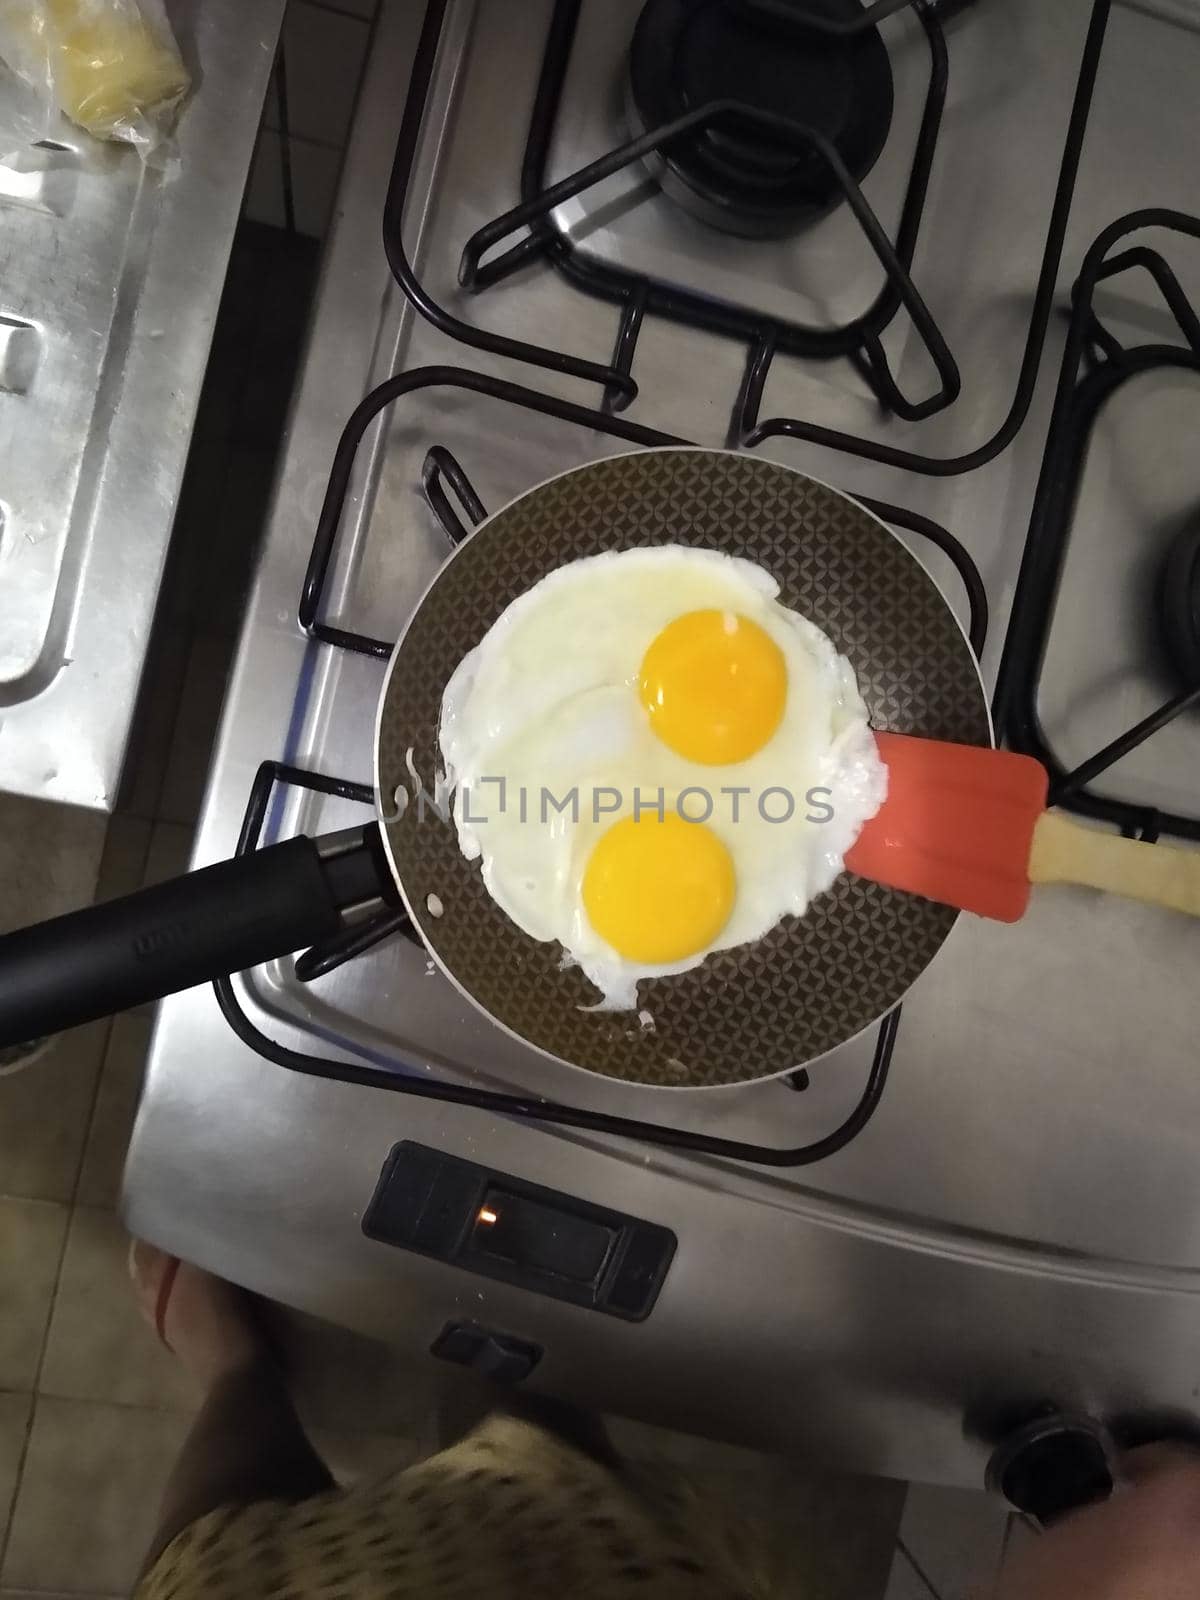 salvador, bahia, brazil - july 18, 2021: Fried eggs are seen in a frying pan on a stove in the kitchen of a house in Salvador city.